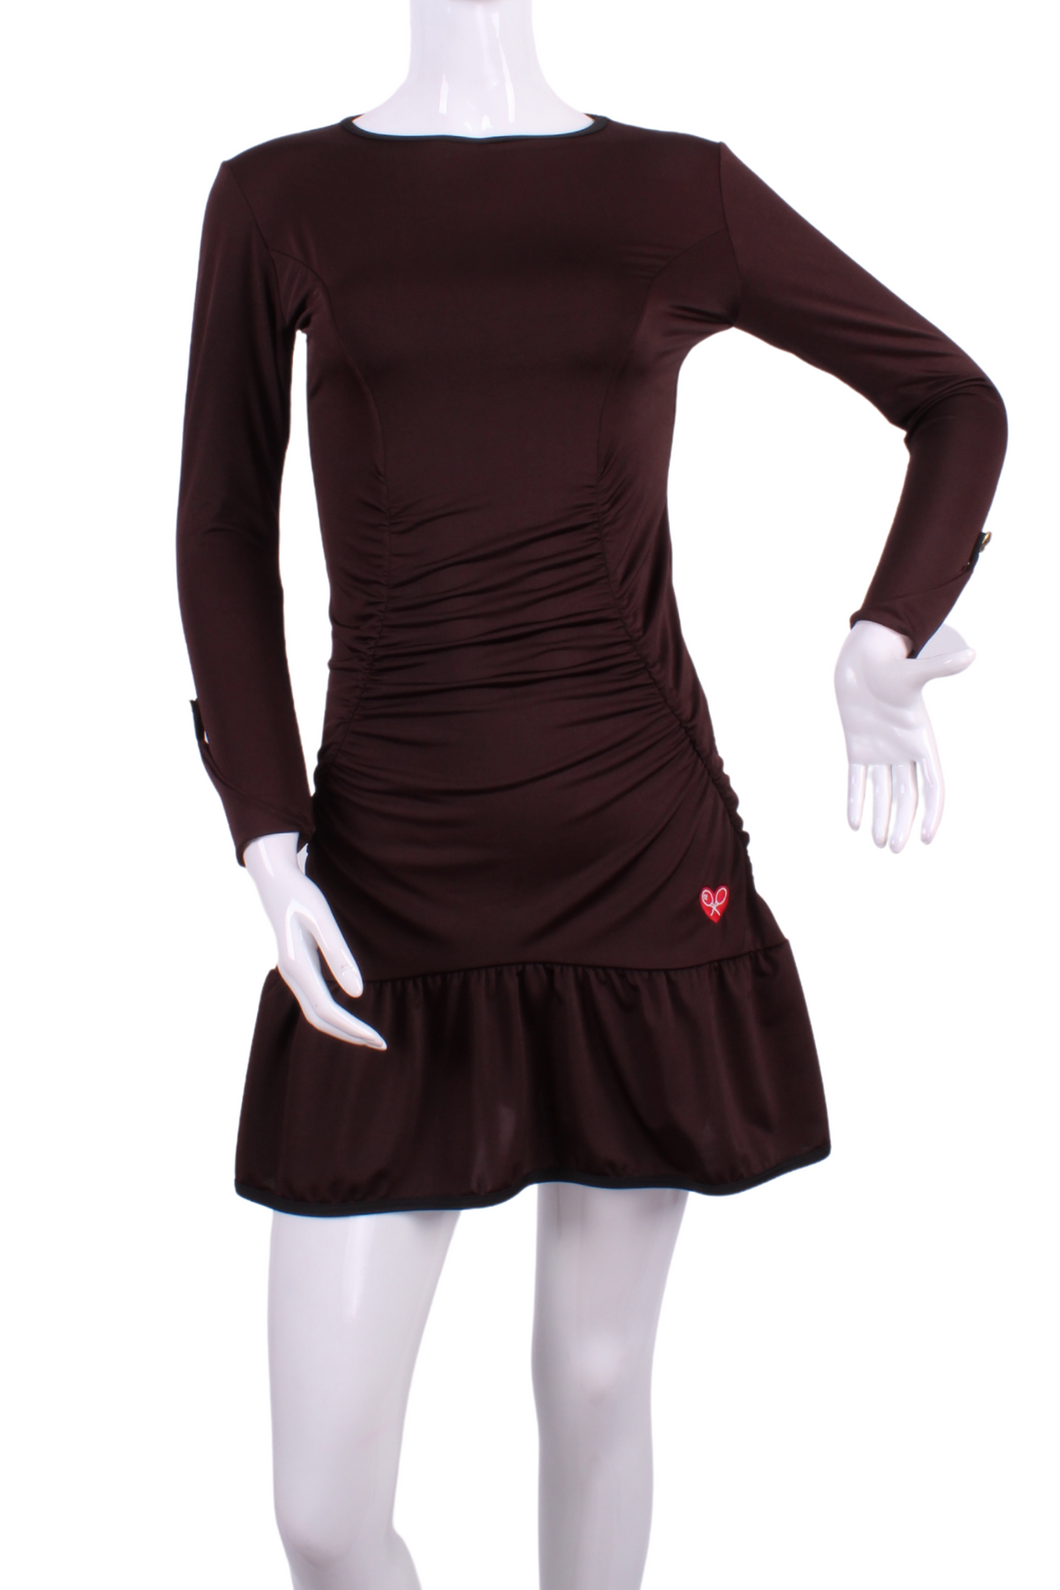 Soft Brown Long Sleeve Monroe Solid Tennis Dress - I LOVE MY DOUBLES PARTNER!!!